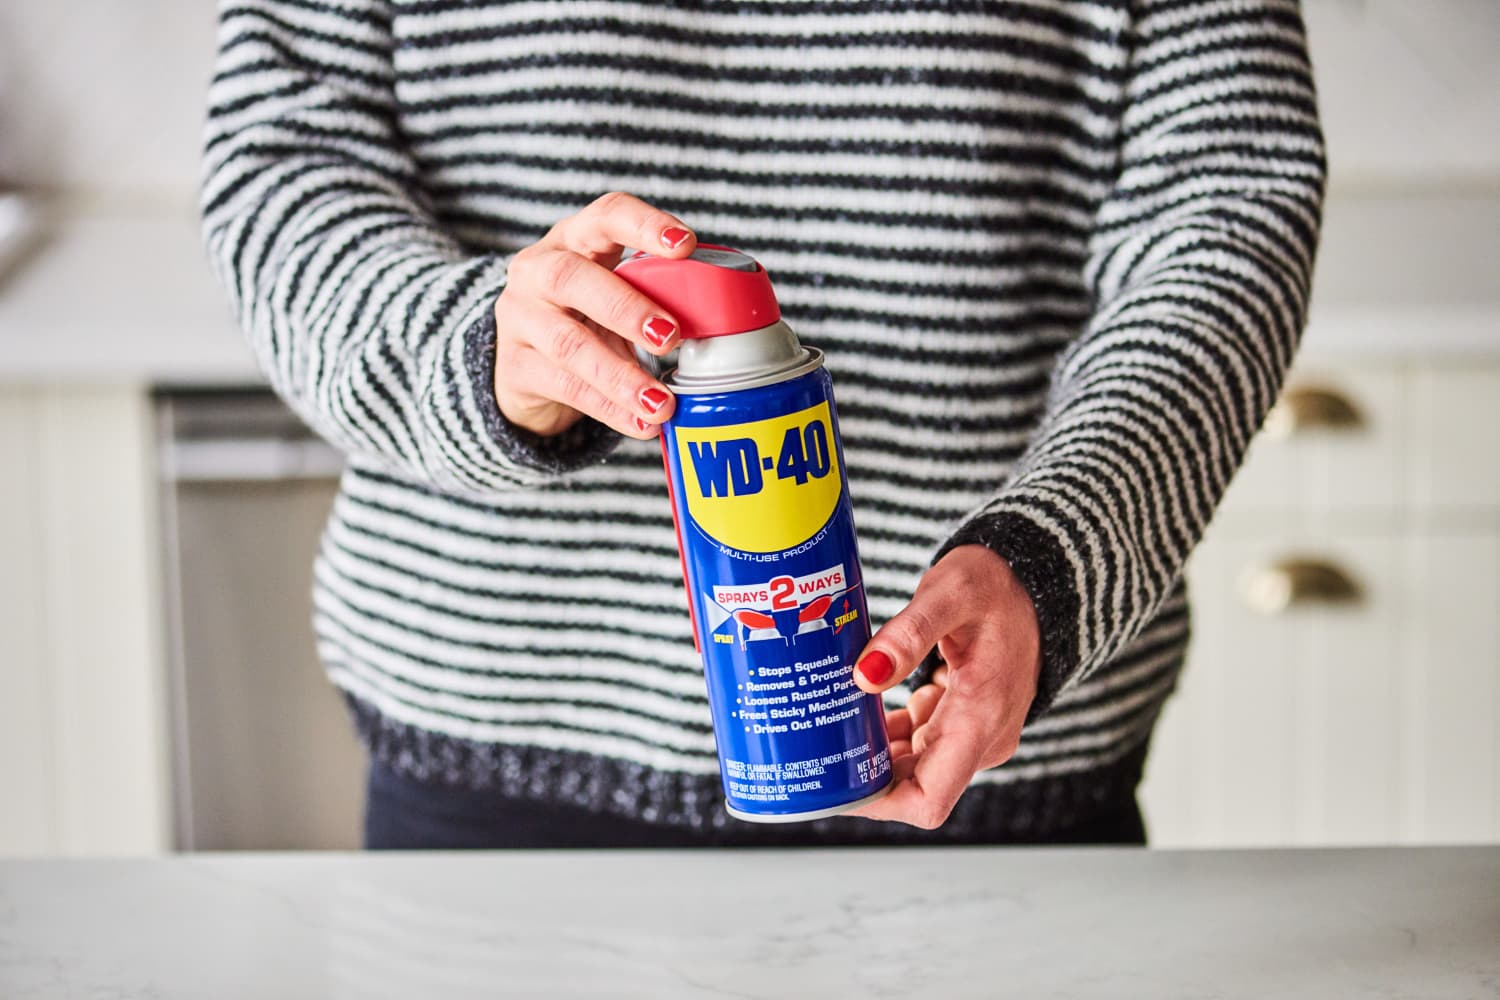 WD40 Uses - Cleaning